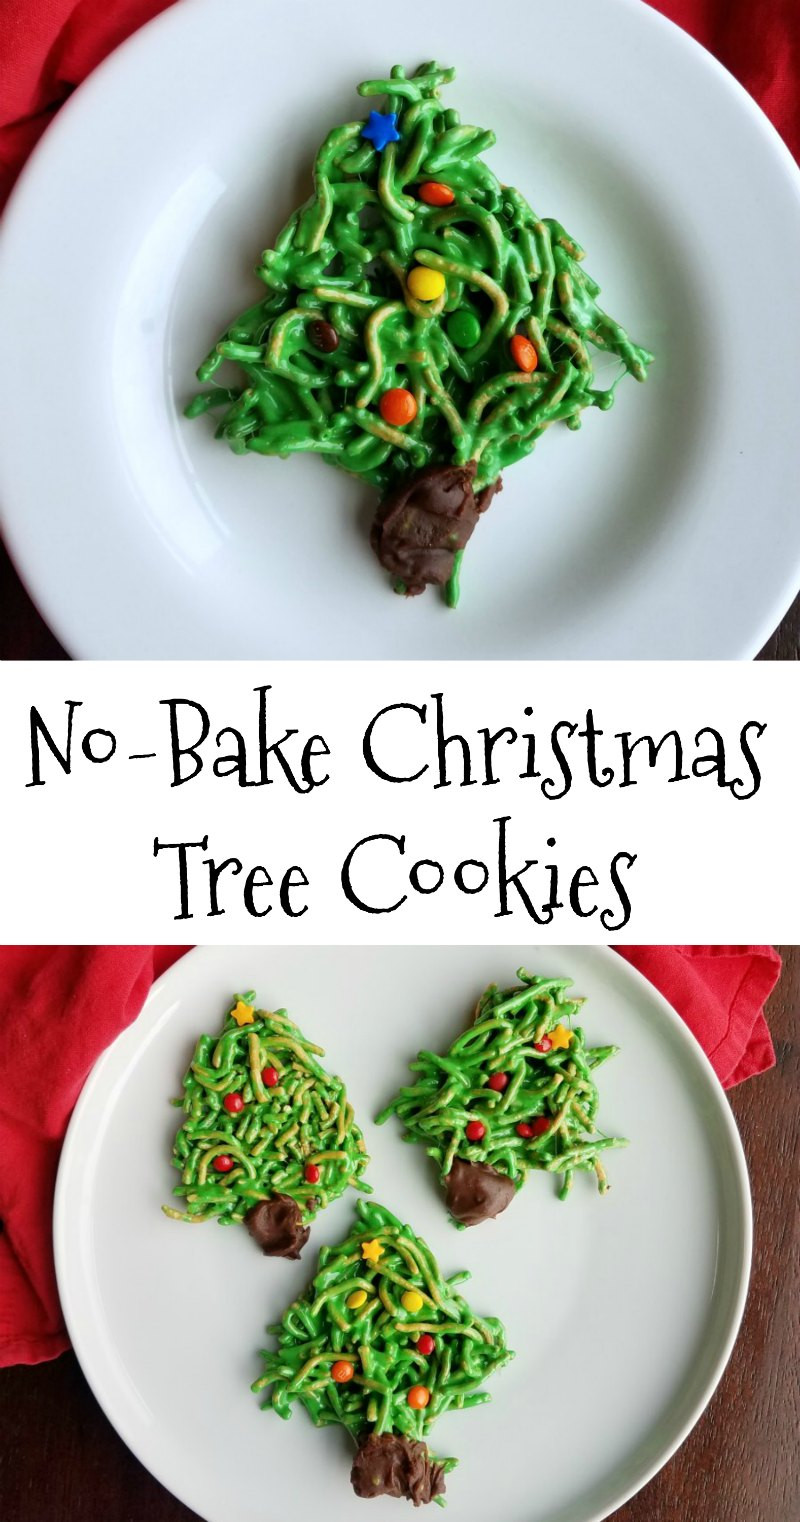 No Bake Christmas Tree Cookies
 Cooking With Carlee No Bake Christmas Tree Cookies